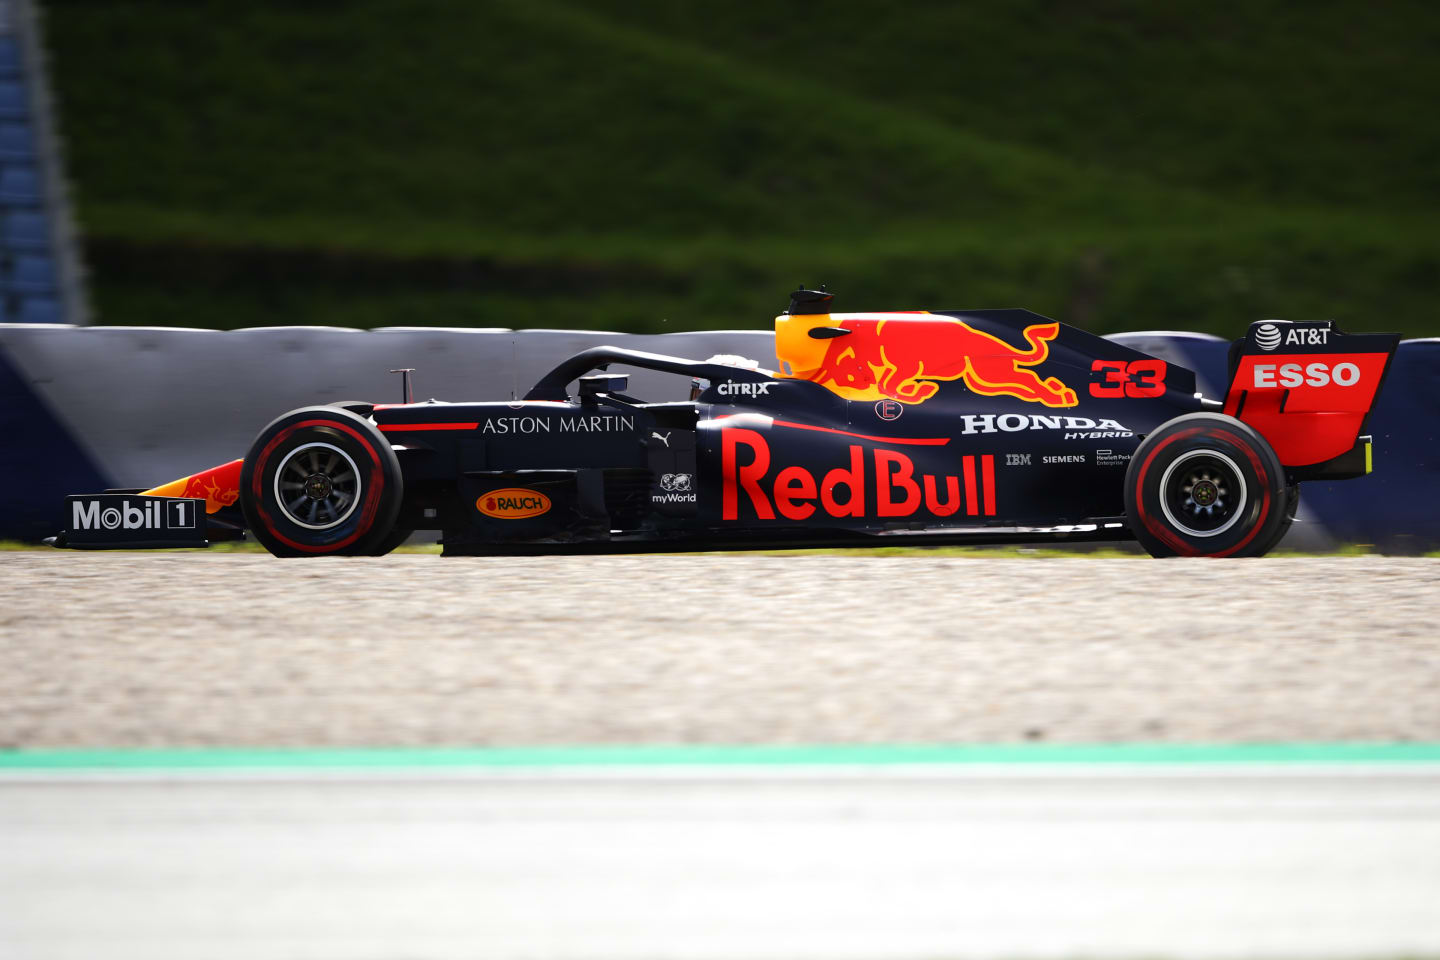 SPIELBERG, AUSTRIA - JULY 03: Max Verstappen of the Netherlands driving the (33) Aston Martin Red